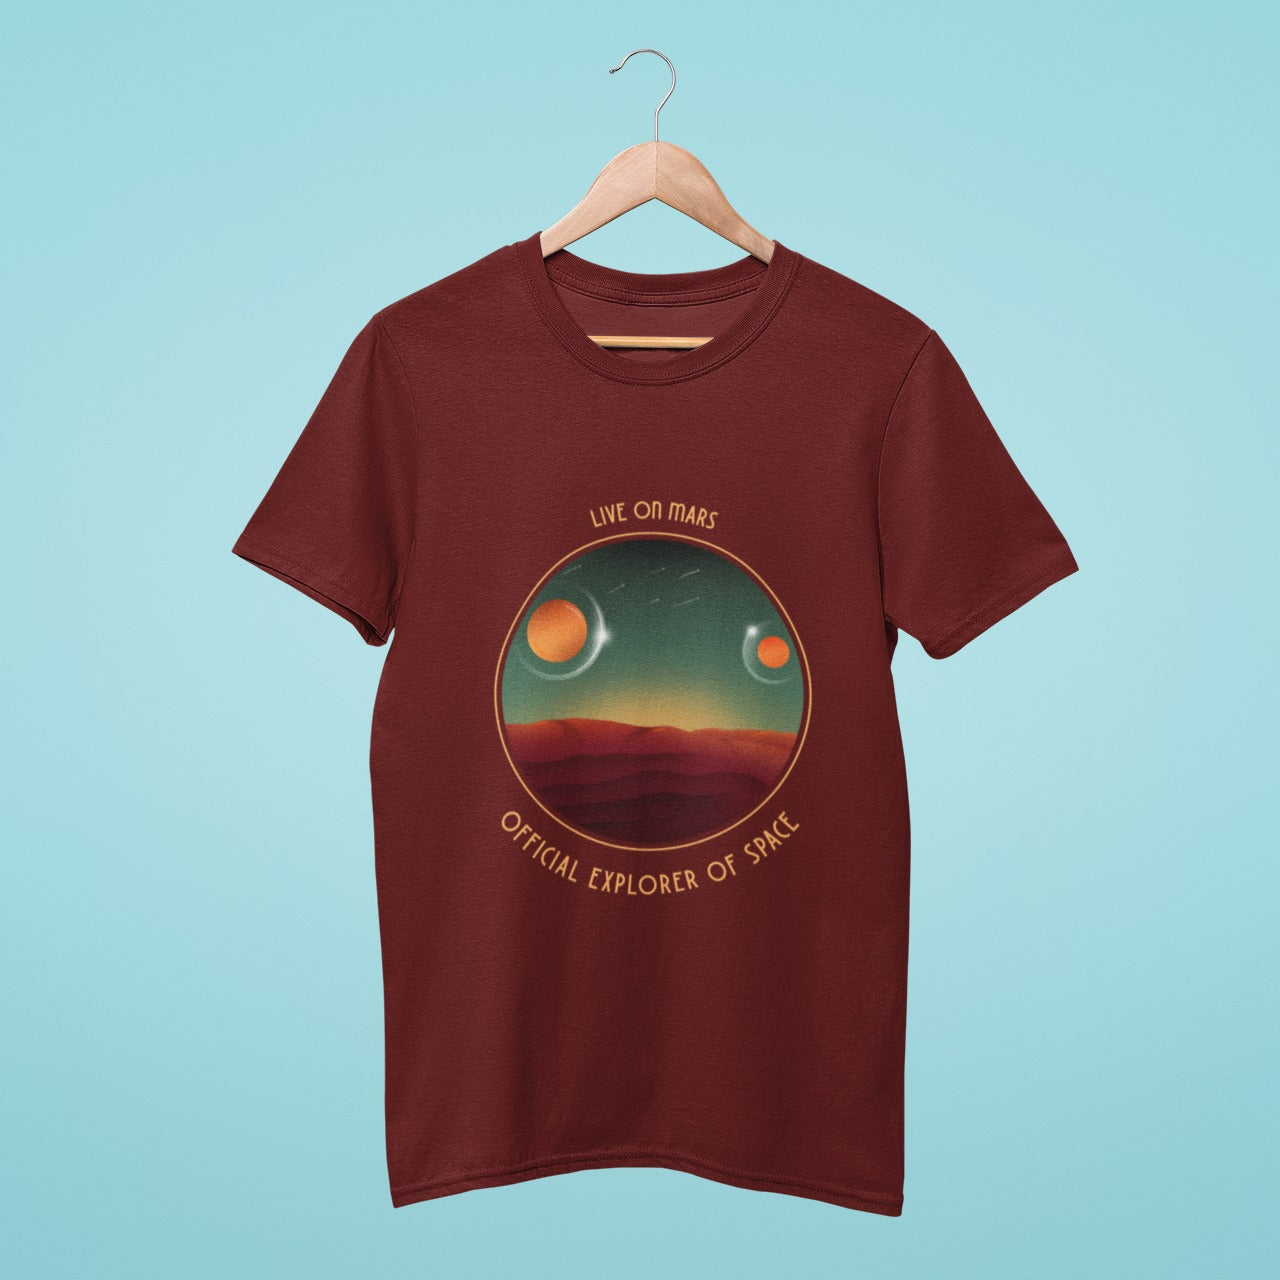 Be an official explorer of space with this brown t-shirt featuring the slogan 'Live on Mars' and a graphic of the Martian land with two moons. Perfect for anyone who dreams of space exploration and adventure. Get yours today and show your support for the exploration of our solar system.